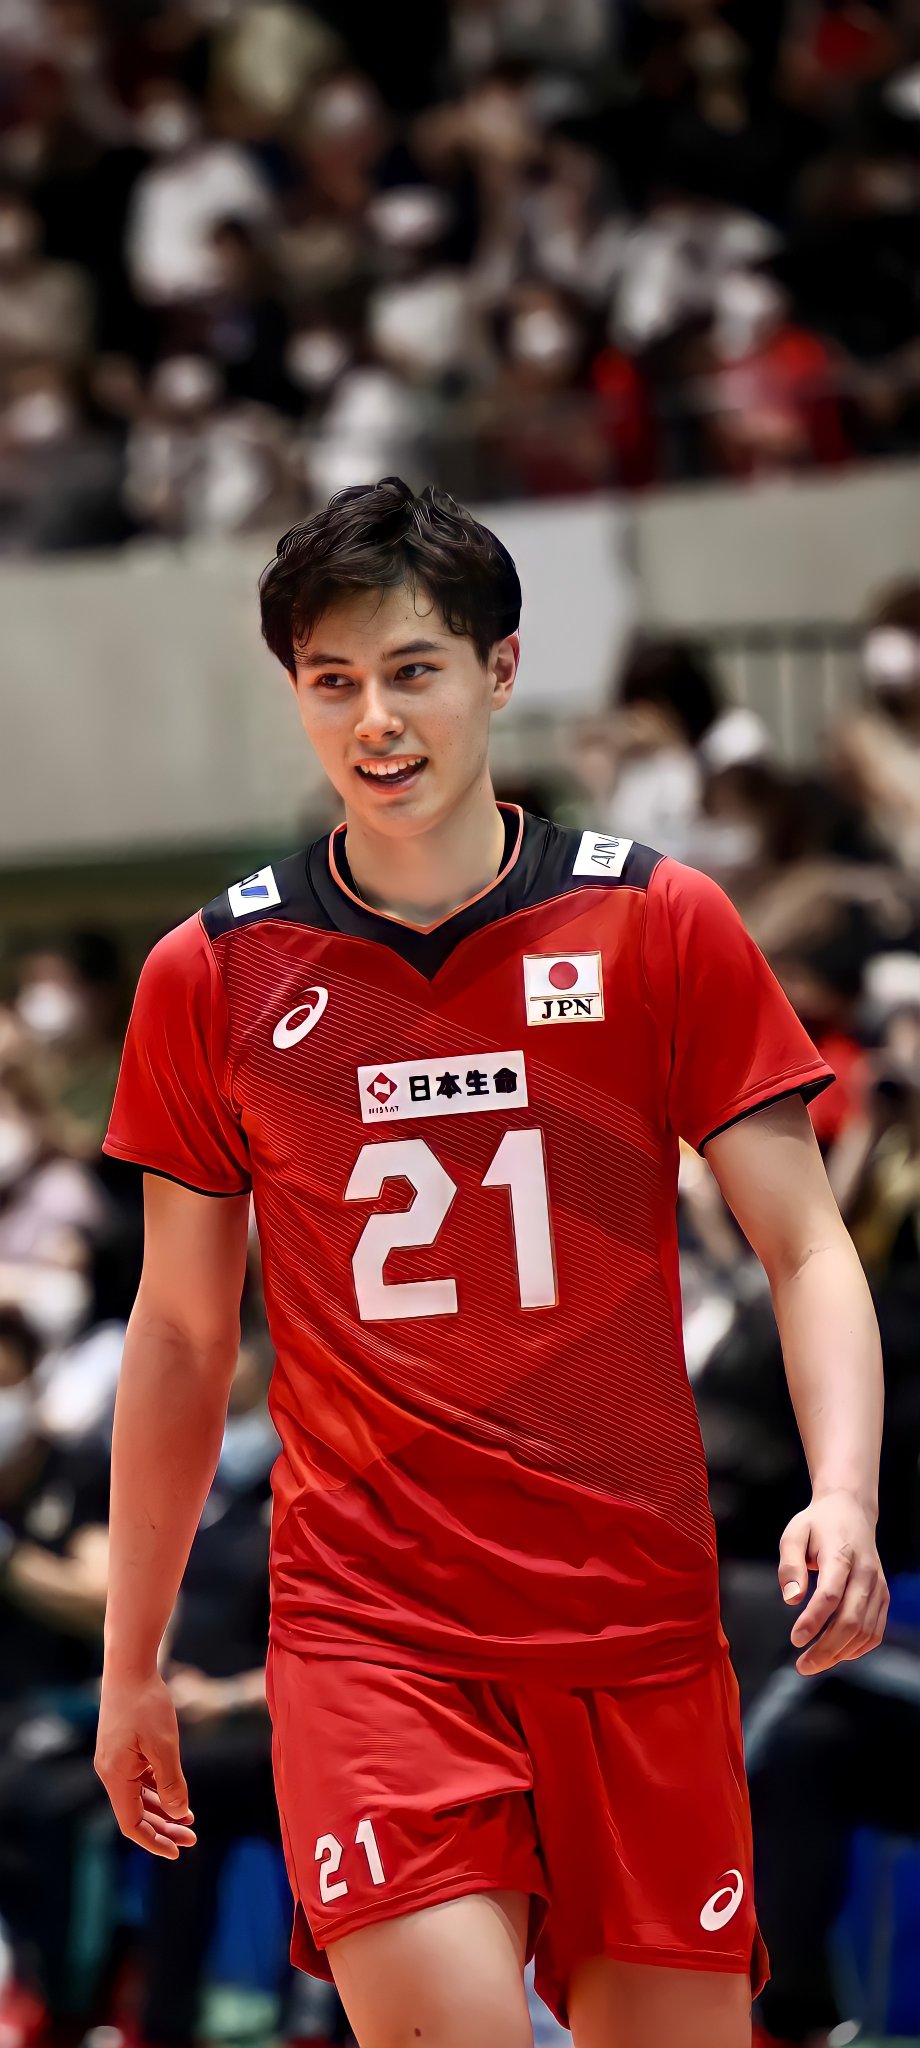 Christine Blue simp to alot of KPOP IDOL But this Handsome Japanese Volleyball Player Hits Different